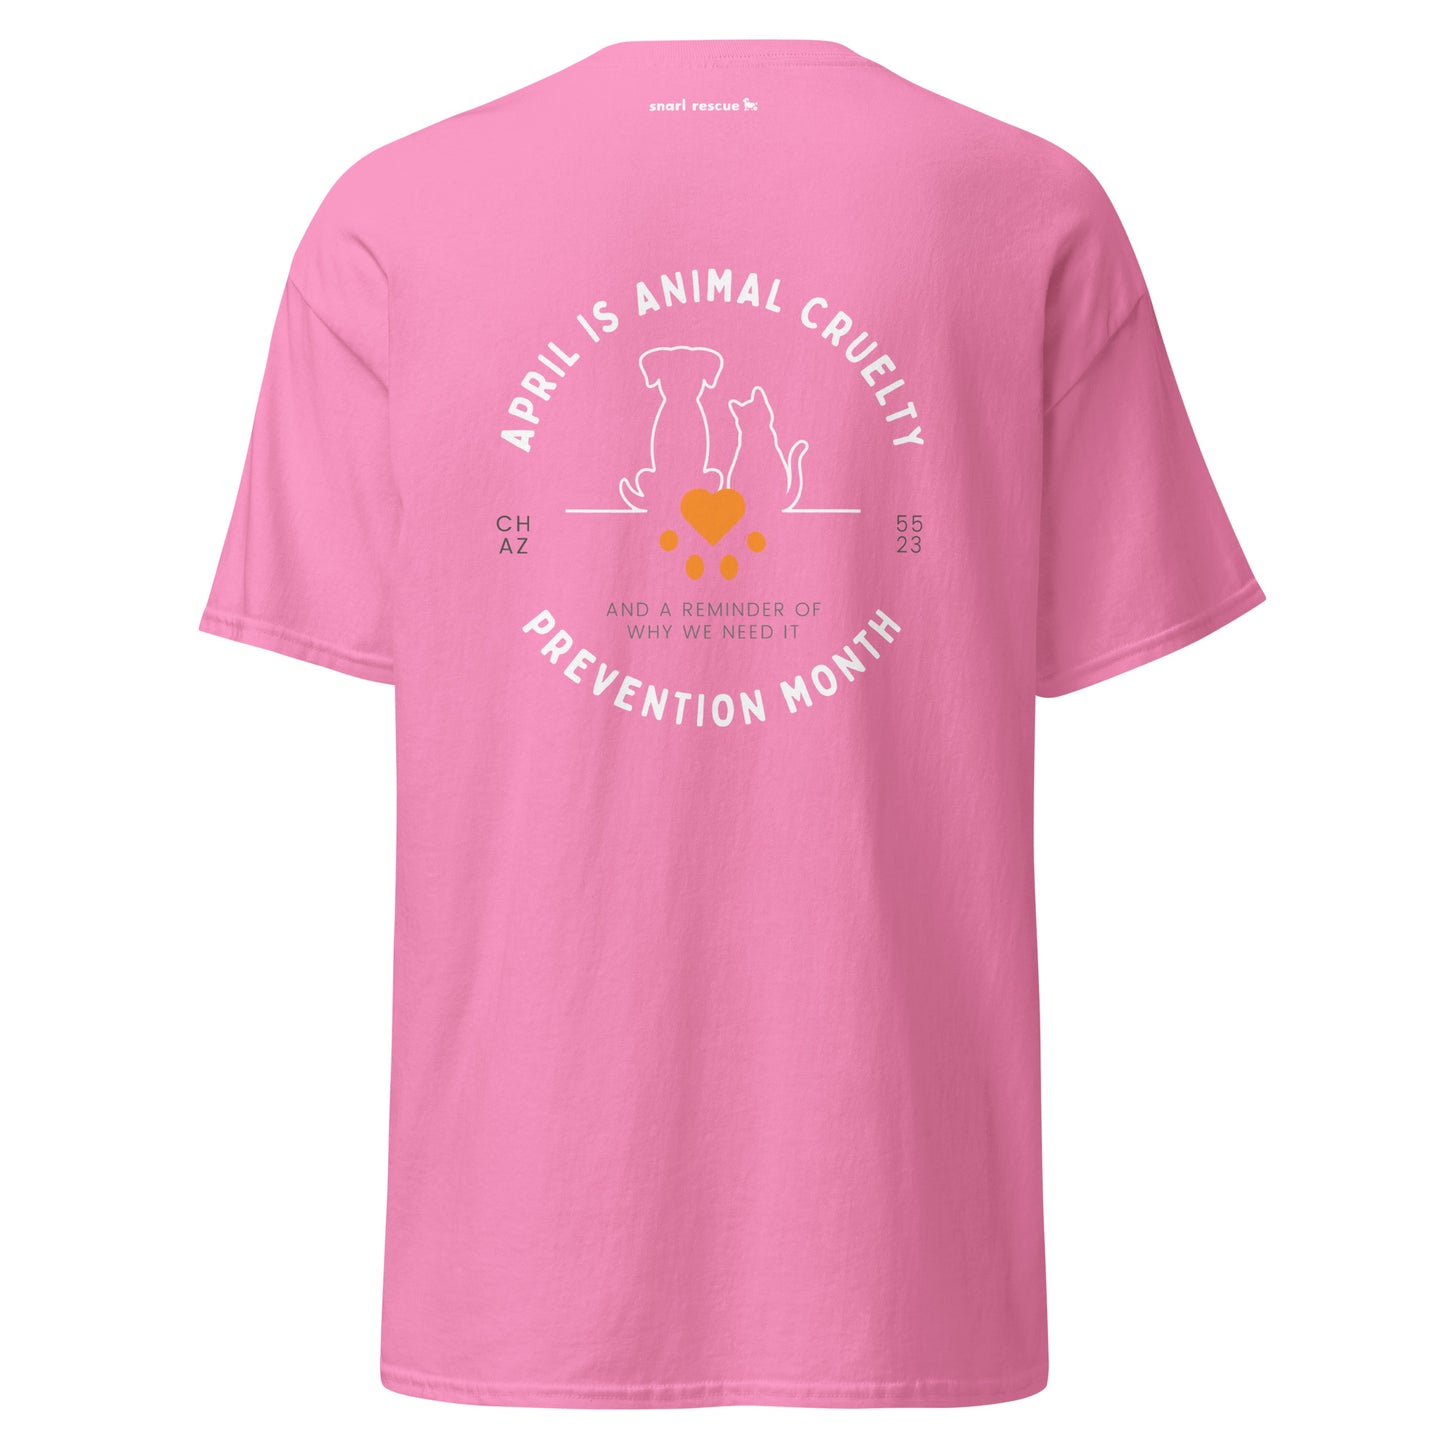 The "Protected Paws" Advocacy Against Animal Cruelty Tee